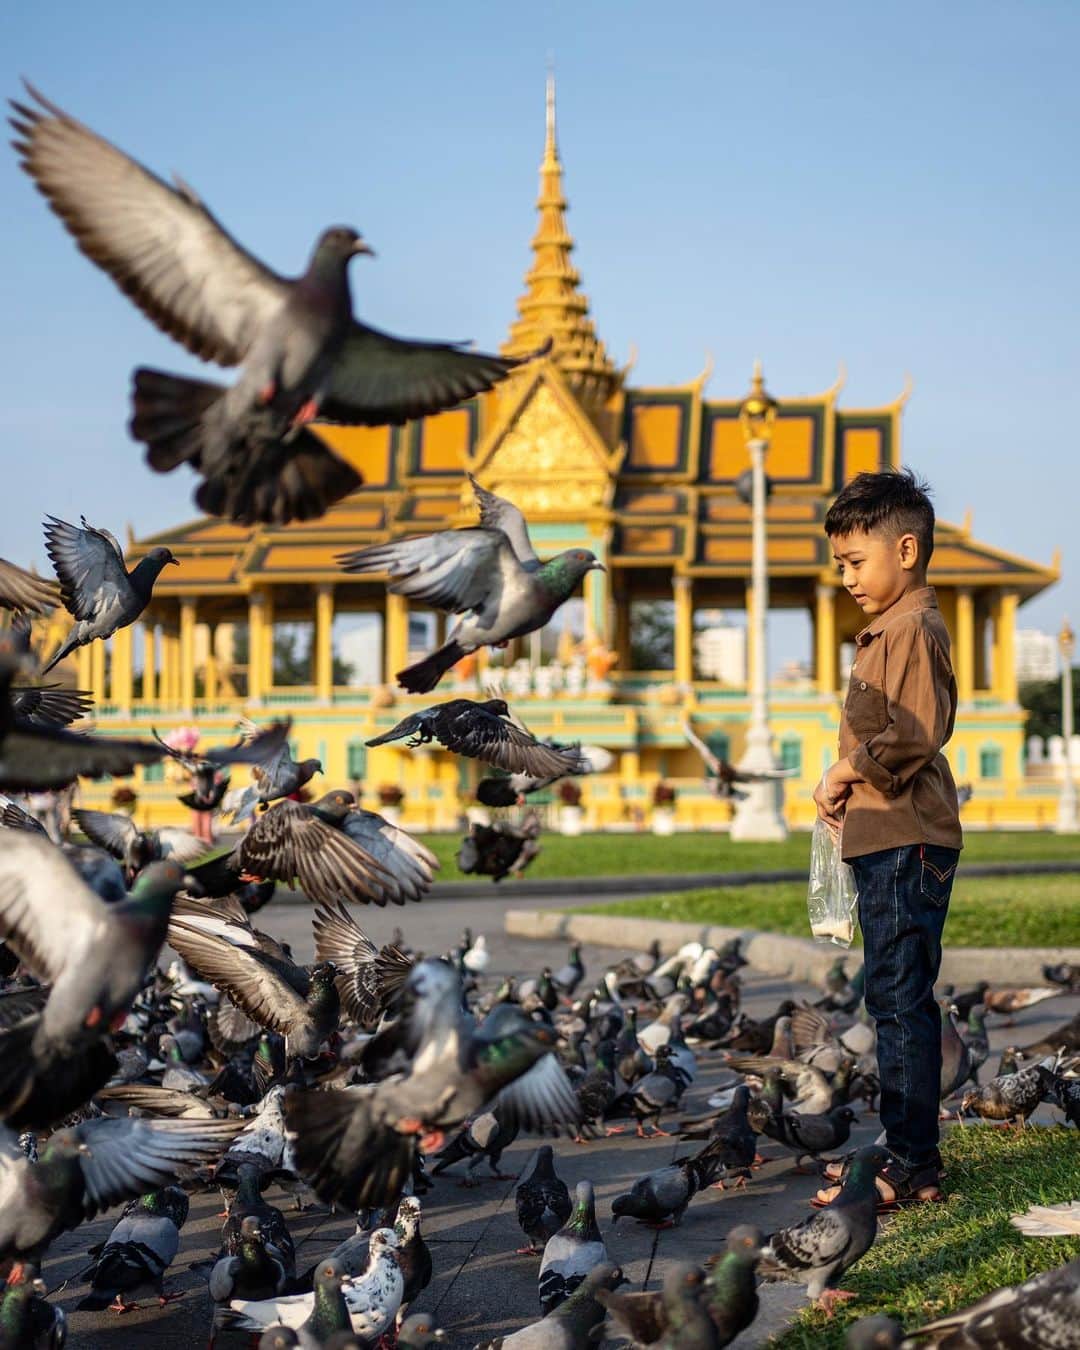 VuTheara Khamのインスタグラム：「Kingdom of Cambodia in my heart forever, 2023 💙❤️🇰🇭 It’s  serie of pictures taken this morning in Phnom Penh. I’m so happy to be back in Cambodia, thanks everybody for your kindness since I arrived before yesterday.  Which one do you prefer? [1-10] . #phnompenh #cambodia #phnompenhphotographycollective」